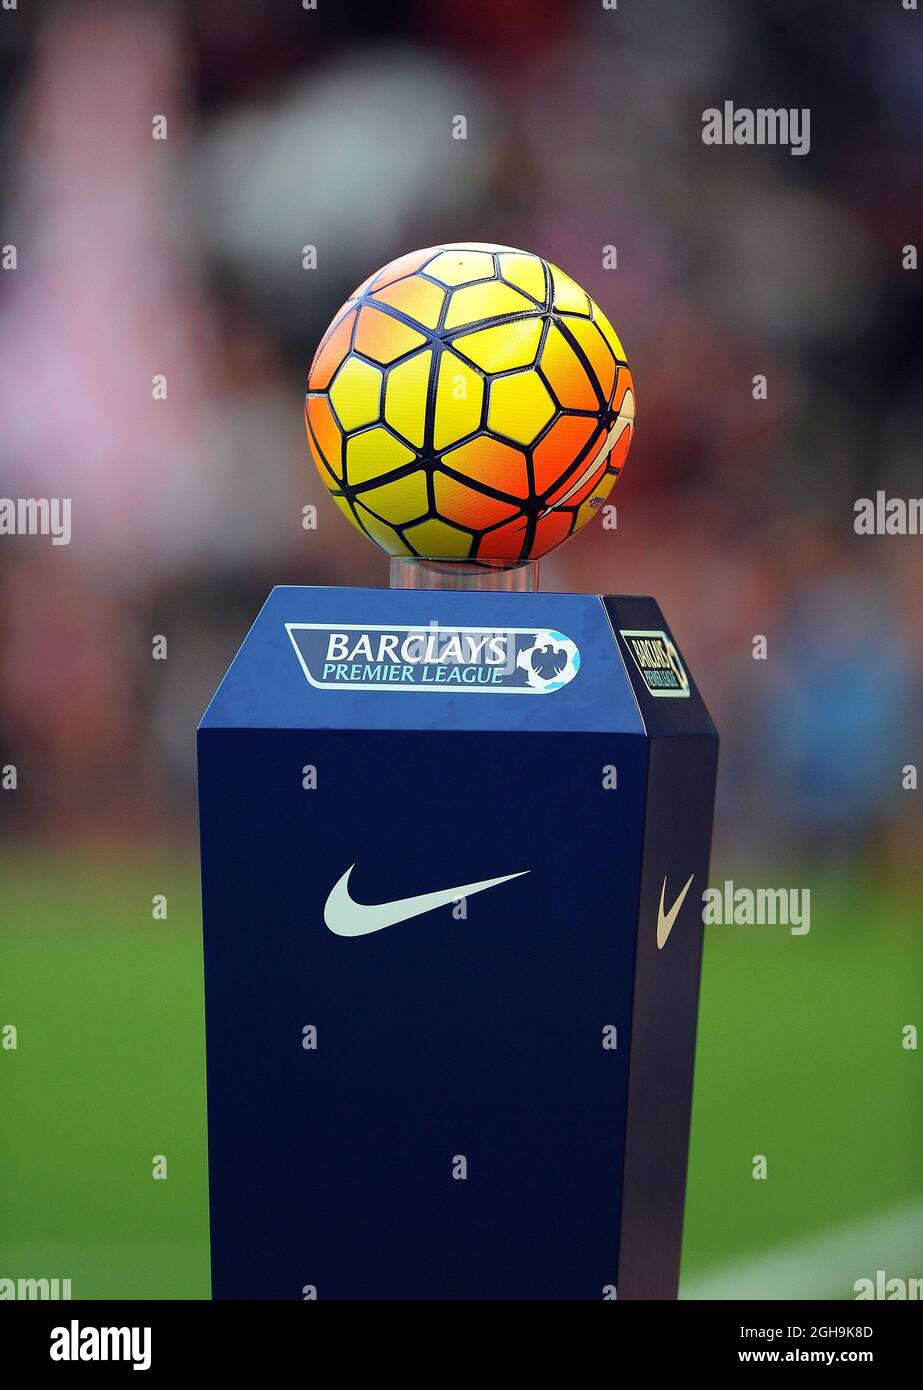 Image #: 40485112 Oct. 25, 2015 - Liverpool, United Kingdom - The new White  and Red Nike Ordem 3 Barclays Premier League match ball for the 2015-16  Season.- Barclays Premier League -